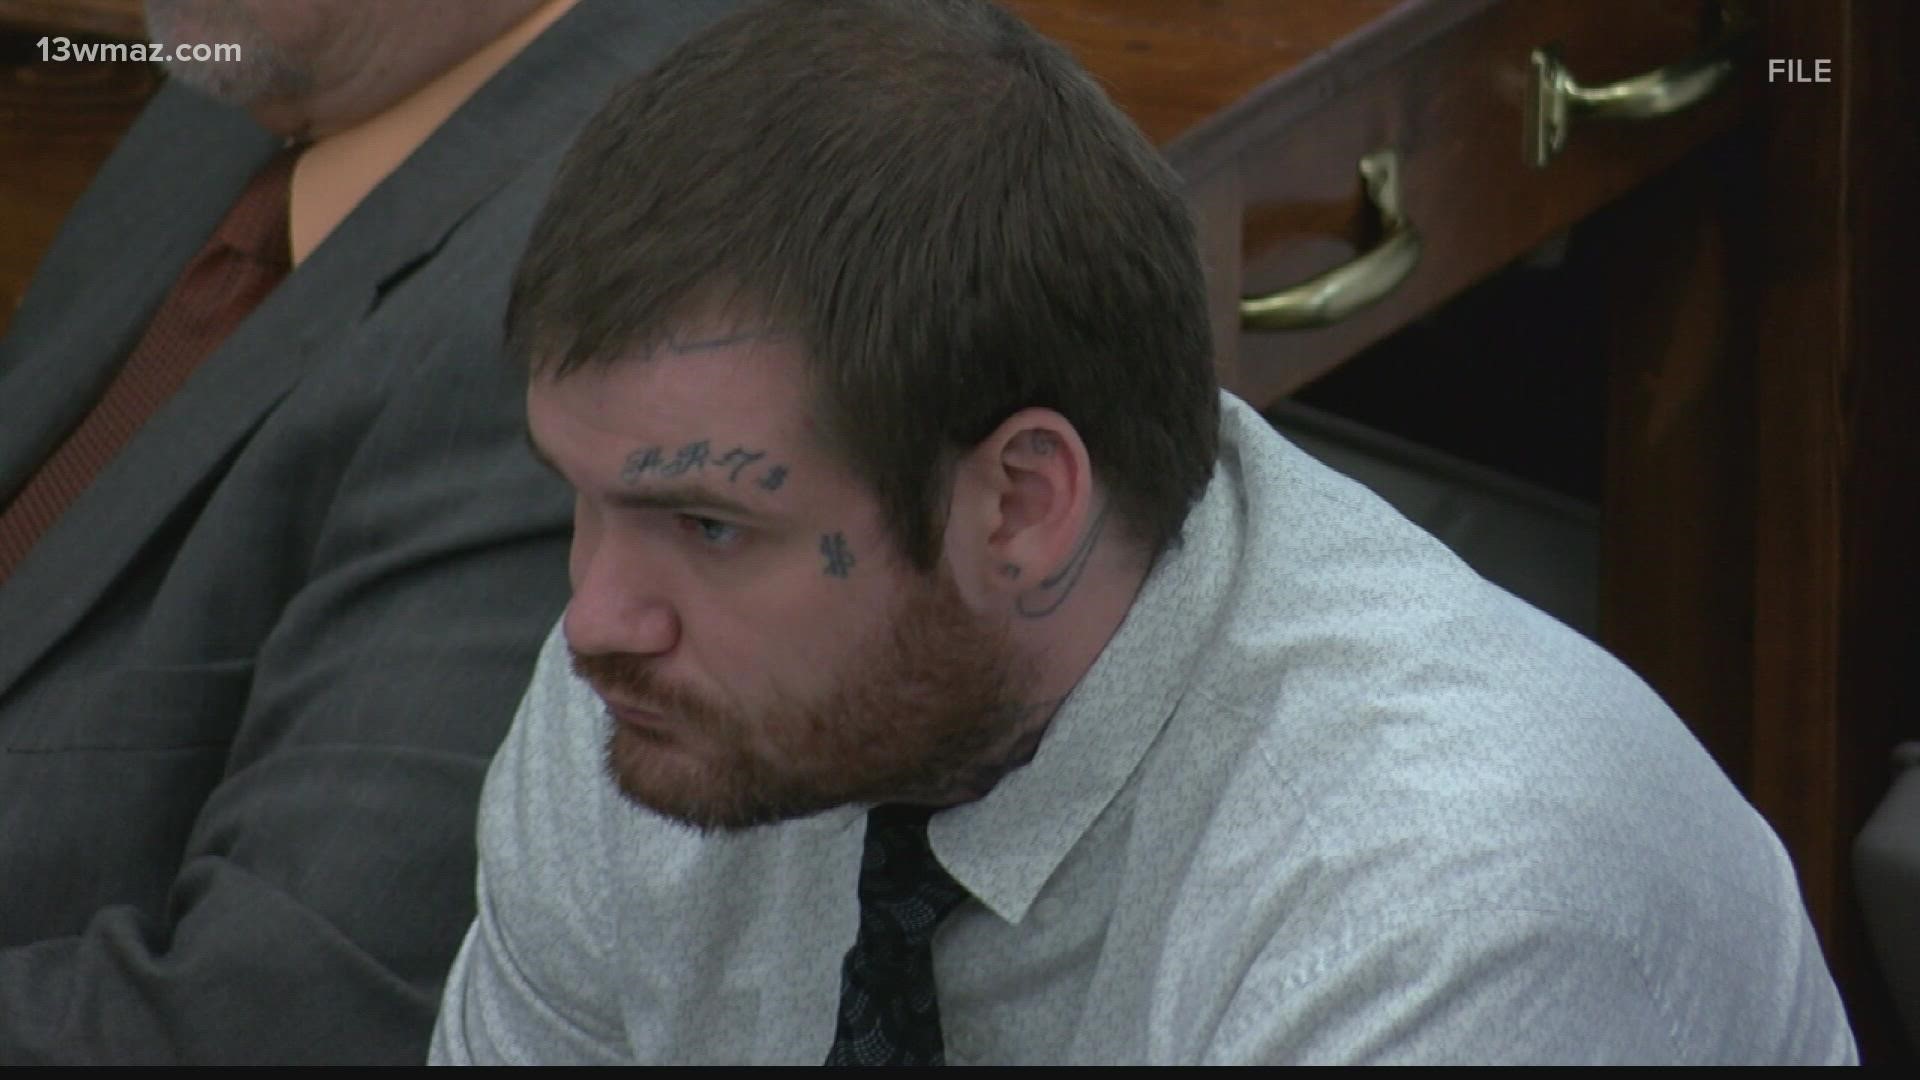 Ricky Dubose was recently found guilty for murder of corrections officers Curtis Billue and Christopher Monica on a transport bus in Putnam County.